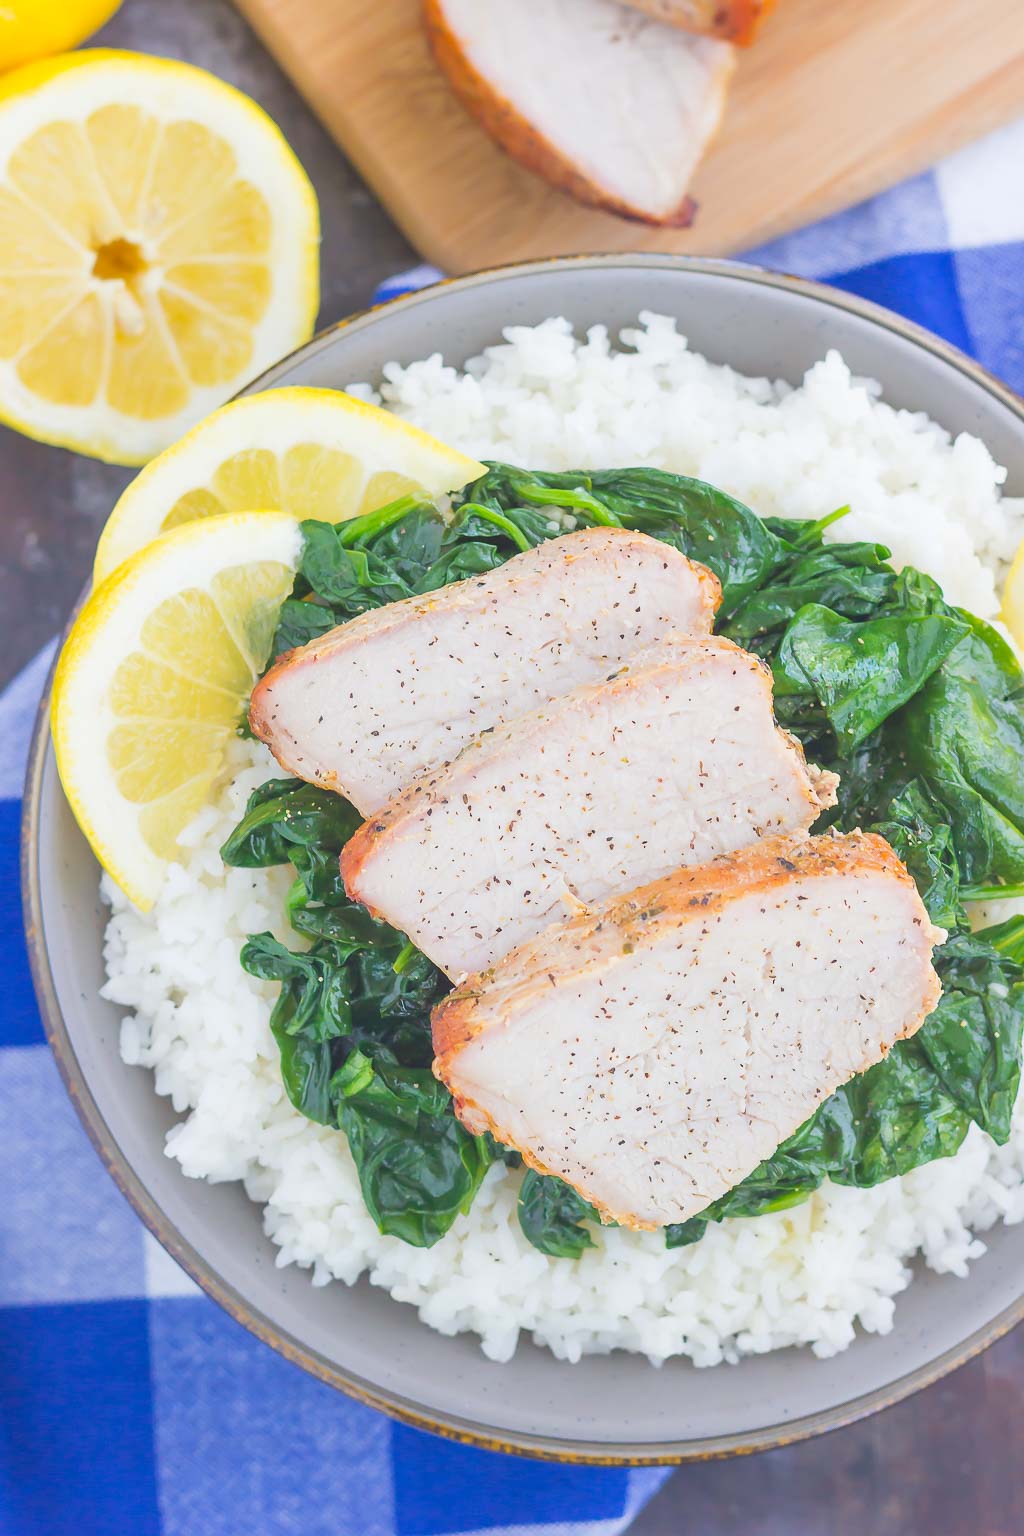 This Grilled Garlic Herb Pork Bowl is an easy meal that's loaded with flavor. Marinated pork loin filet is prepared on the grill and then tossed with some white rice and sautéed spinach. Simple to make a perfect for busy weeknights, this hearty dinner is sure to be a favorite all year long!